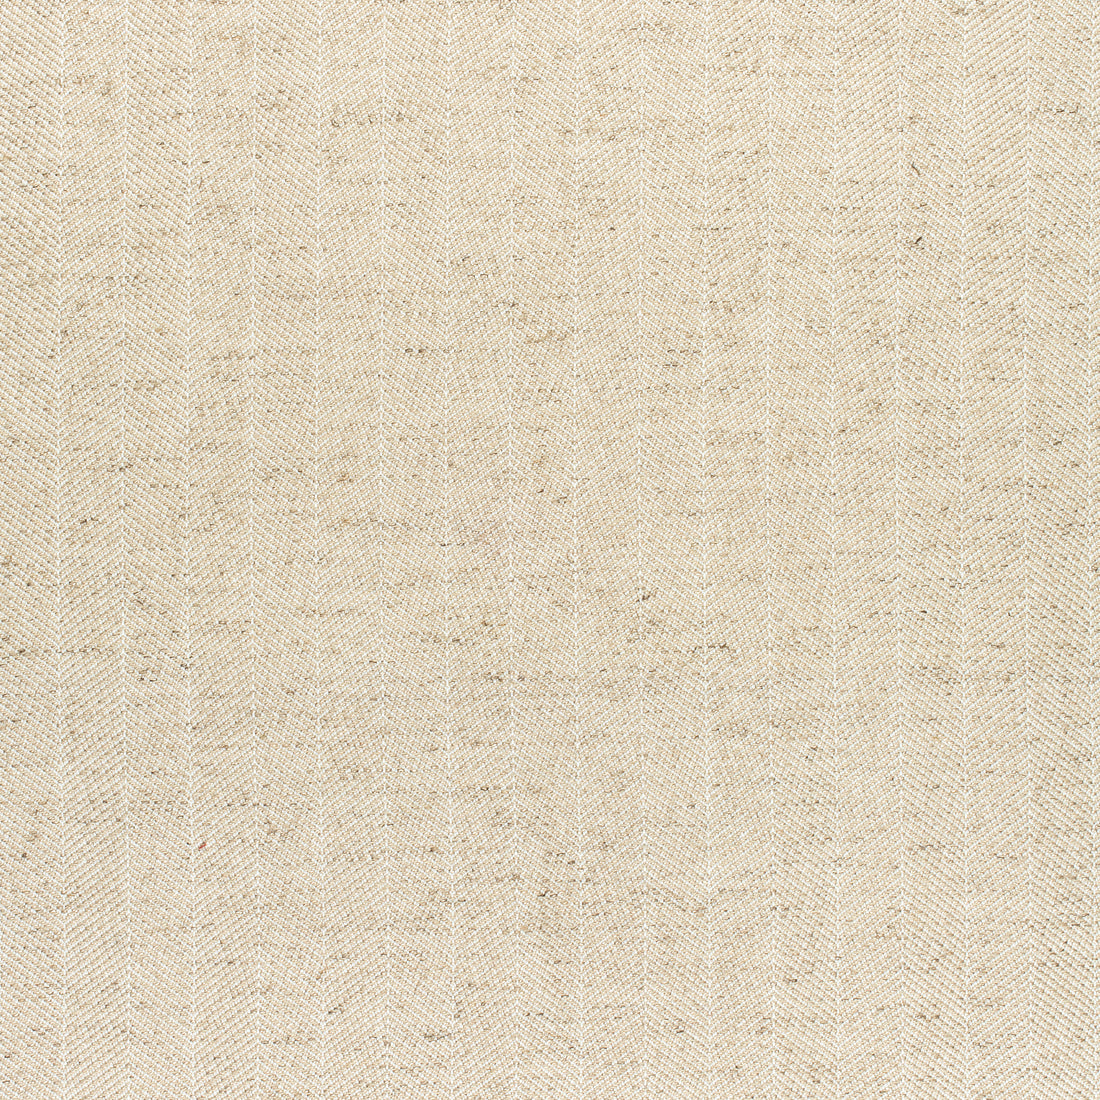 Hamilton Herringbone fabric in linen color - pattern number W80678 - by Thibaut in the Pinnacle collection